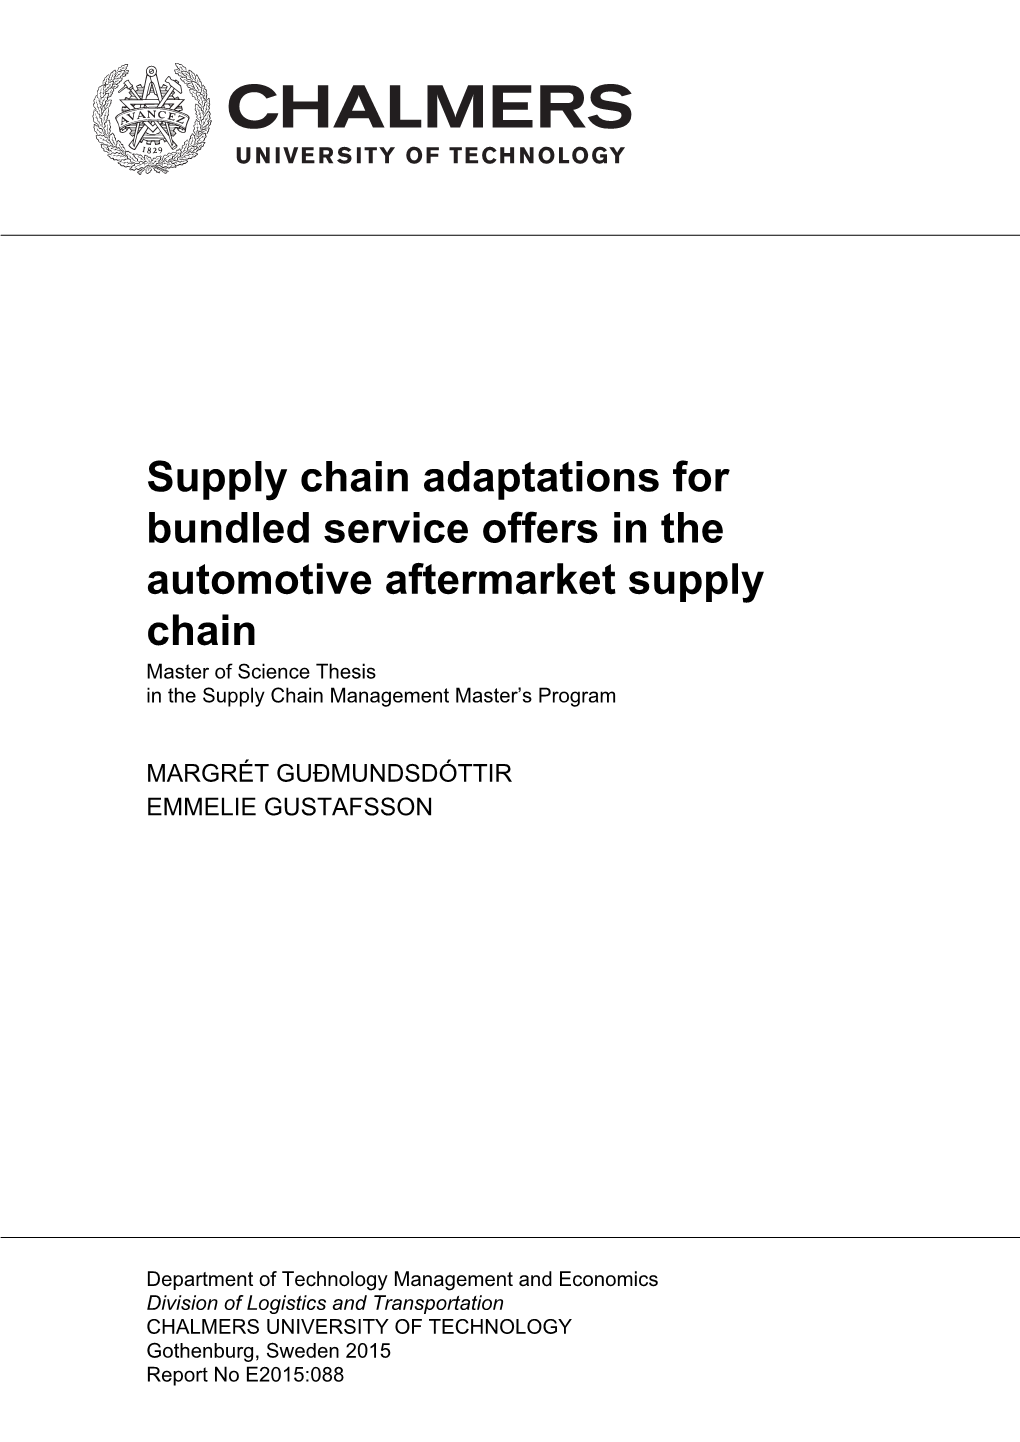 Supply Chain Adaptations for Bundled Service Offers in the Automotive